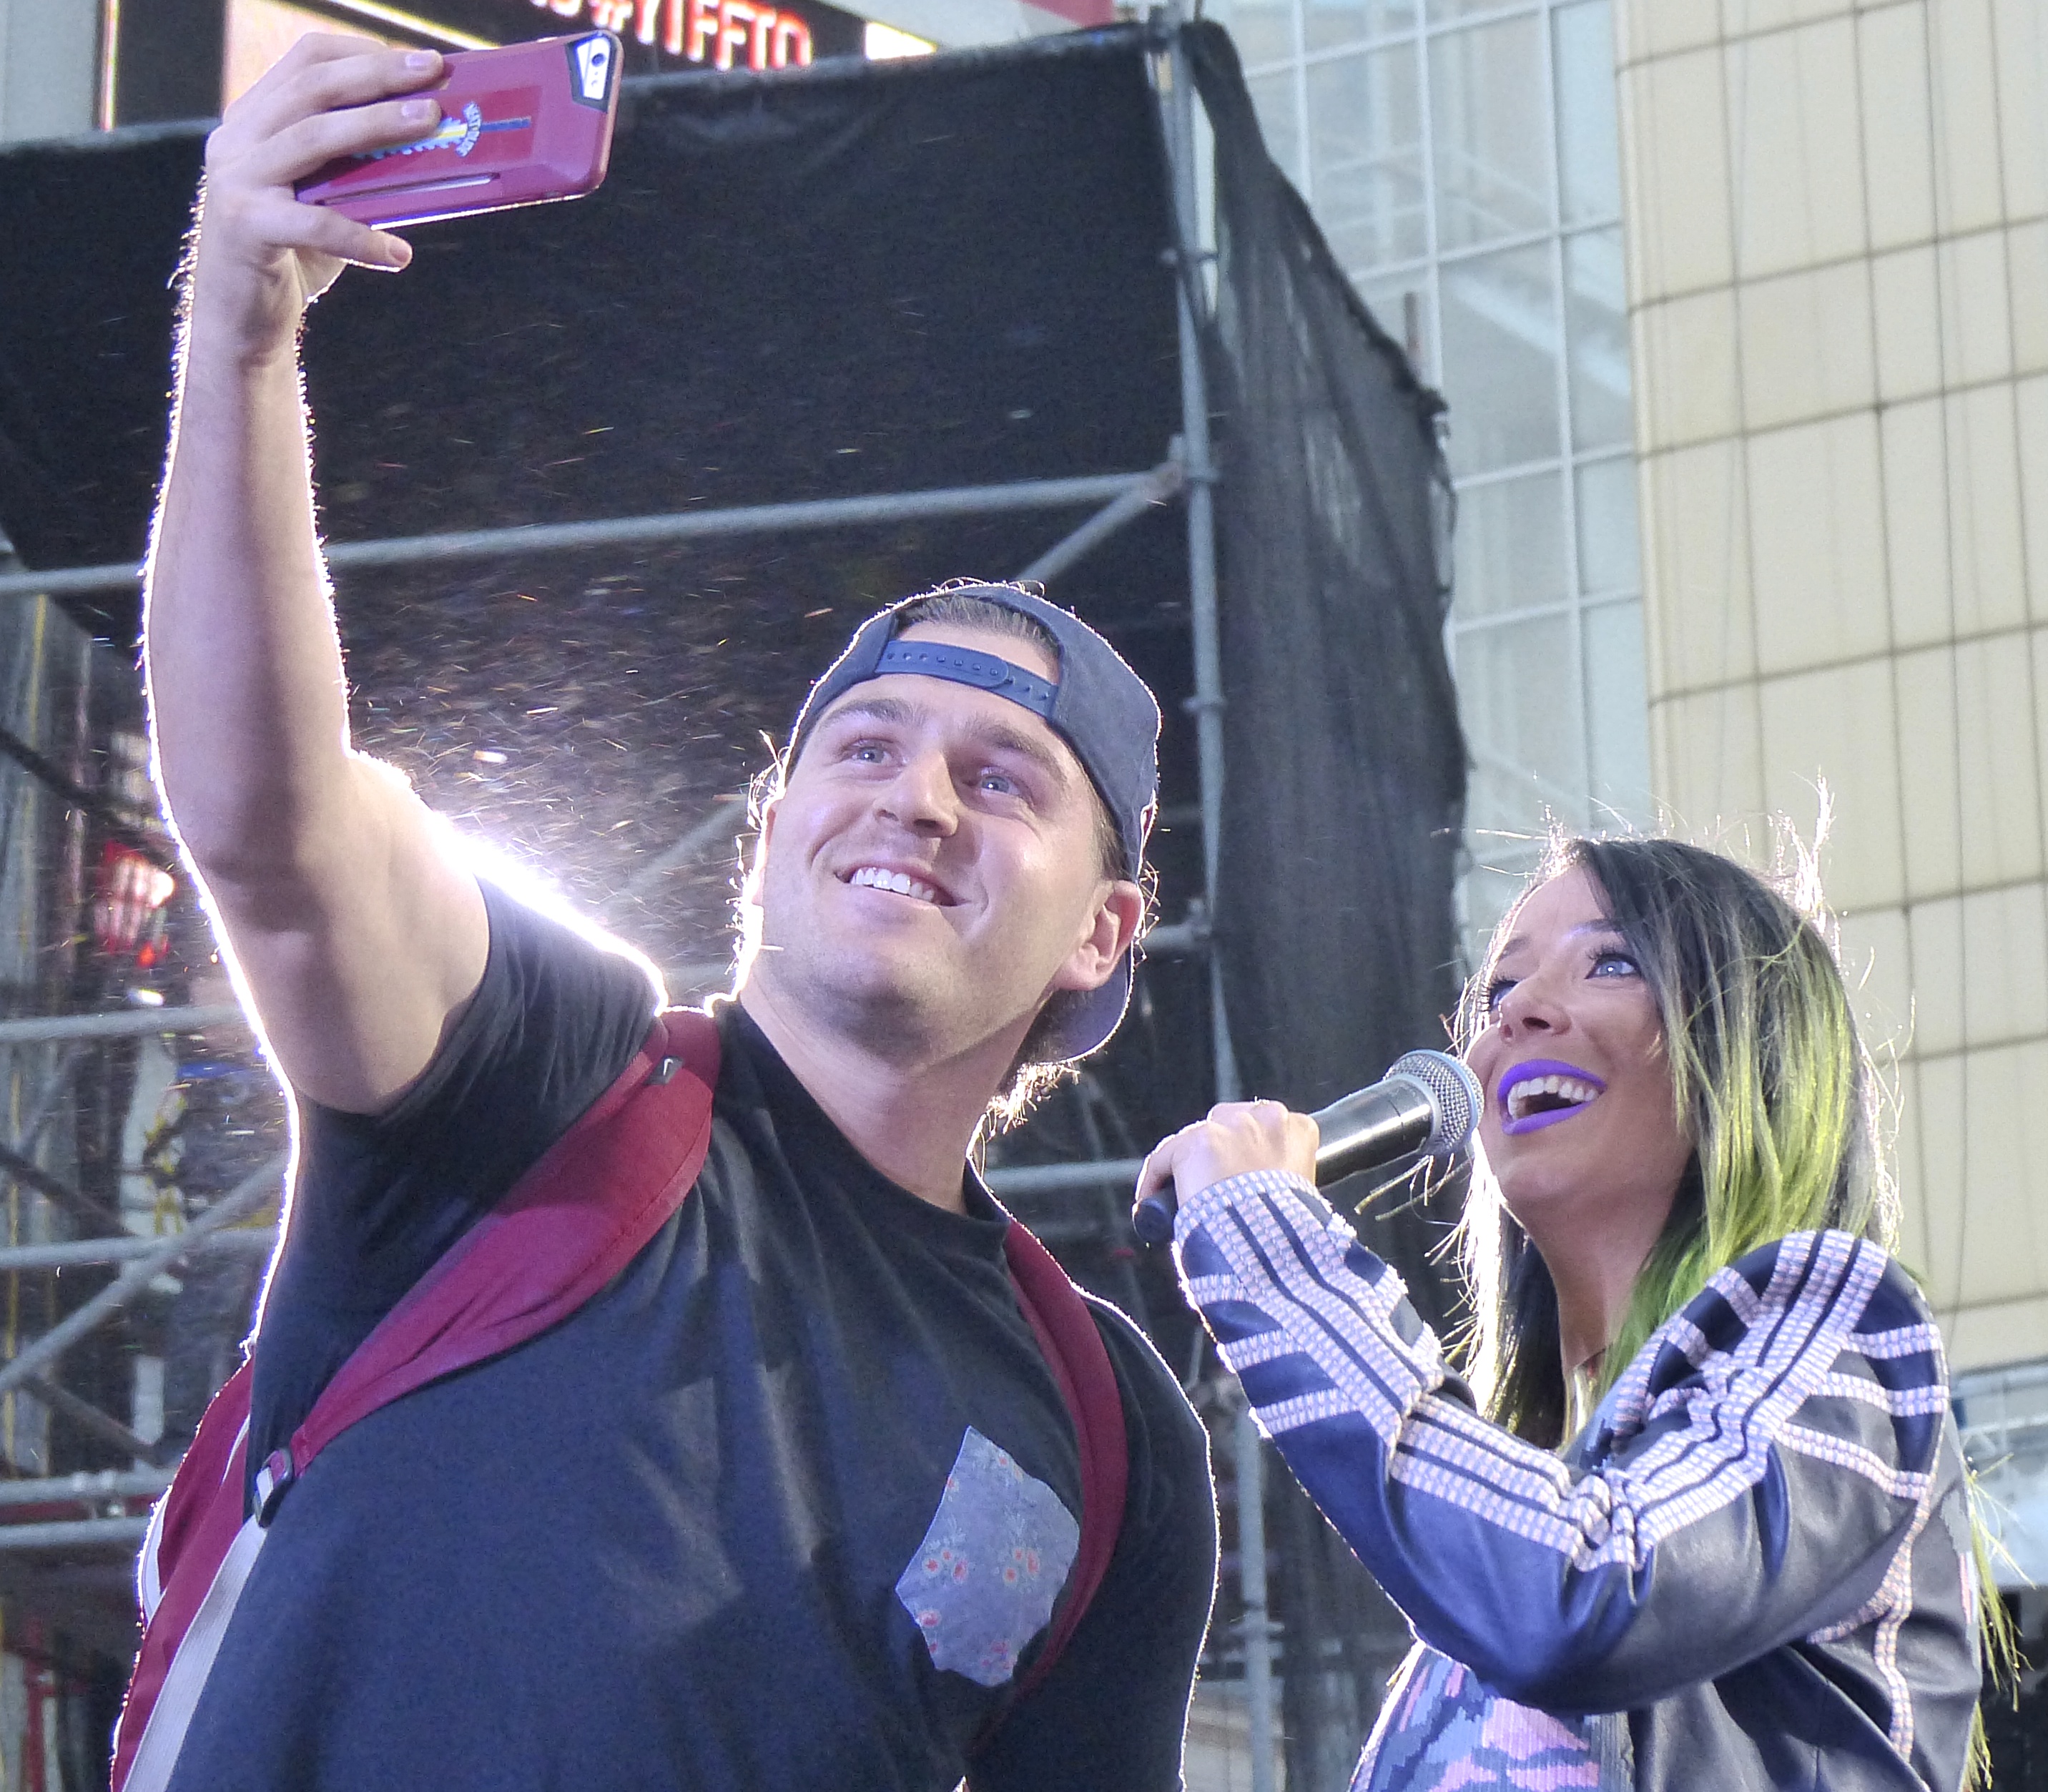 Jenna Marbles takes a selfie with the crowd